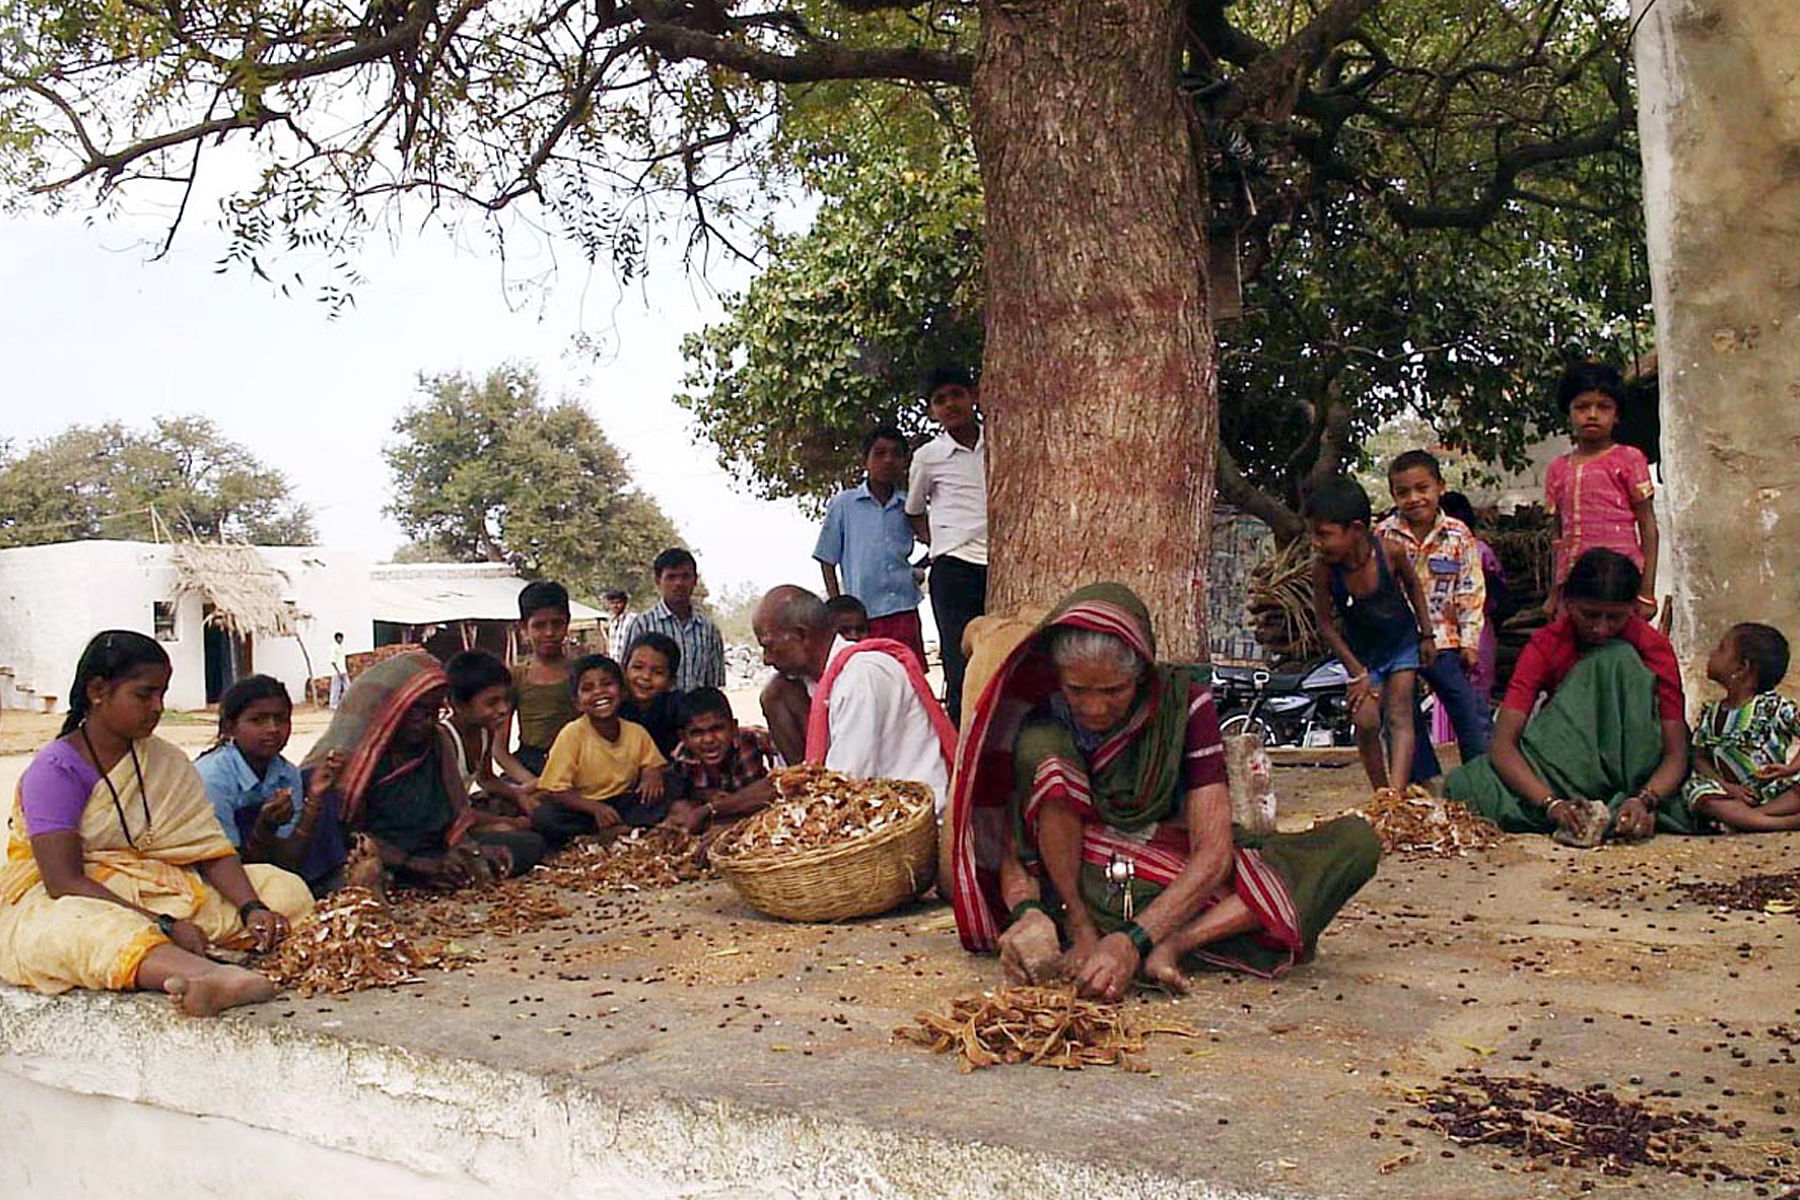 In summer, tamarind processing is a major activity in many villages of the State. photo s by Kishan Rao kulkarni